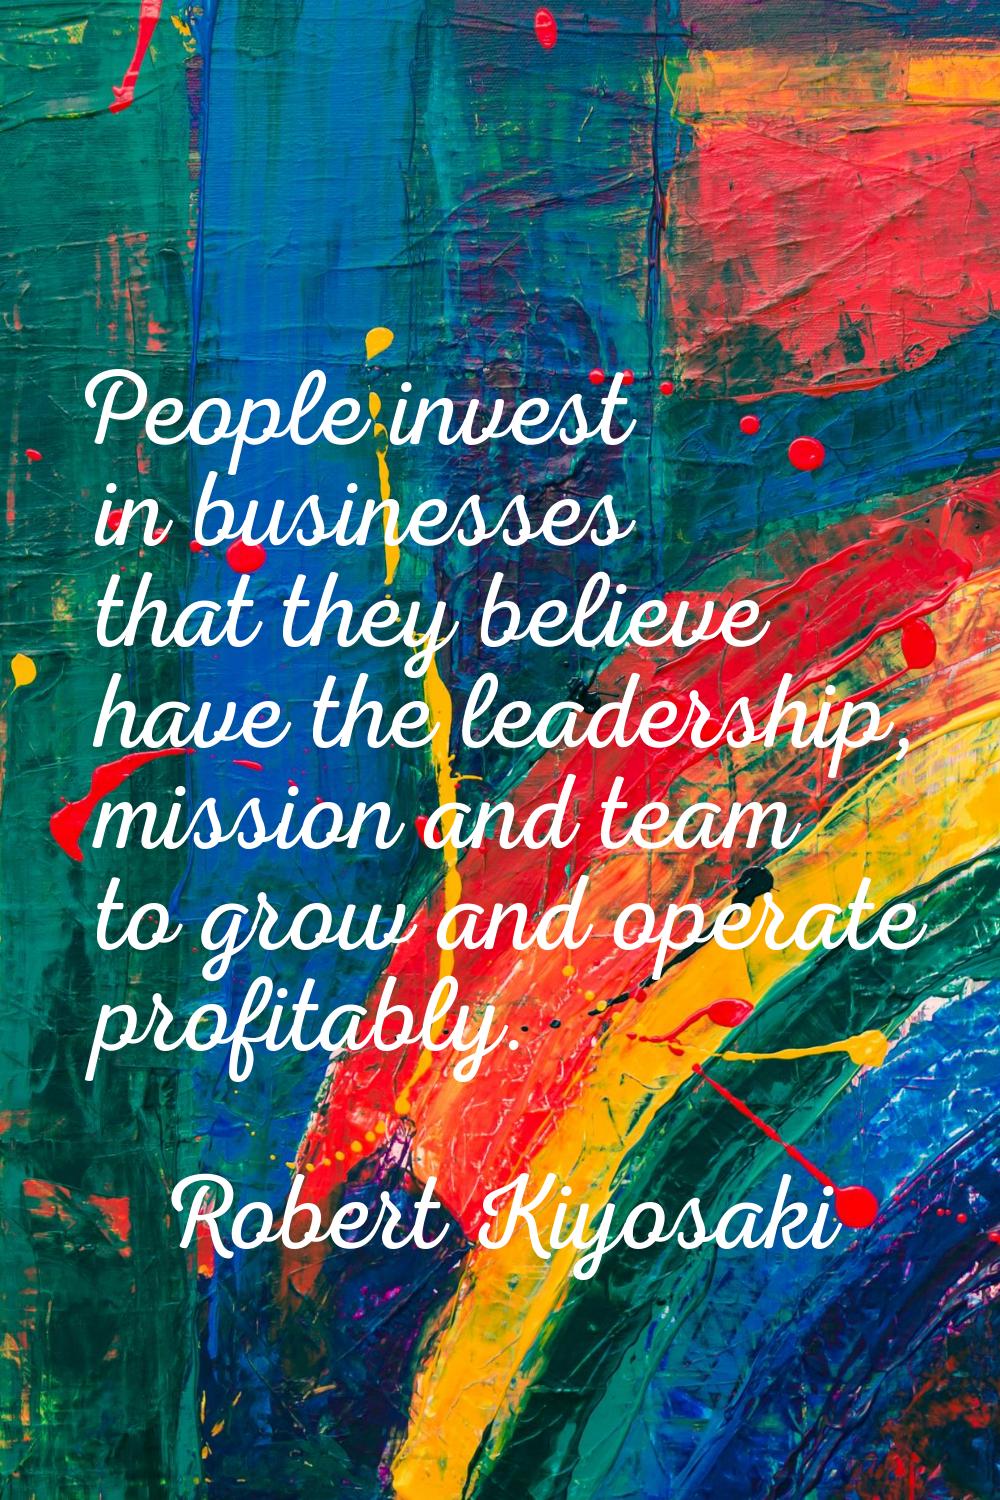 People invest in businesses that they believe have the leadership, mission and team to grow and ope